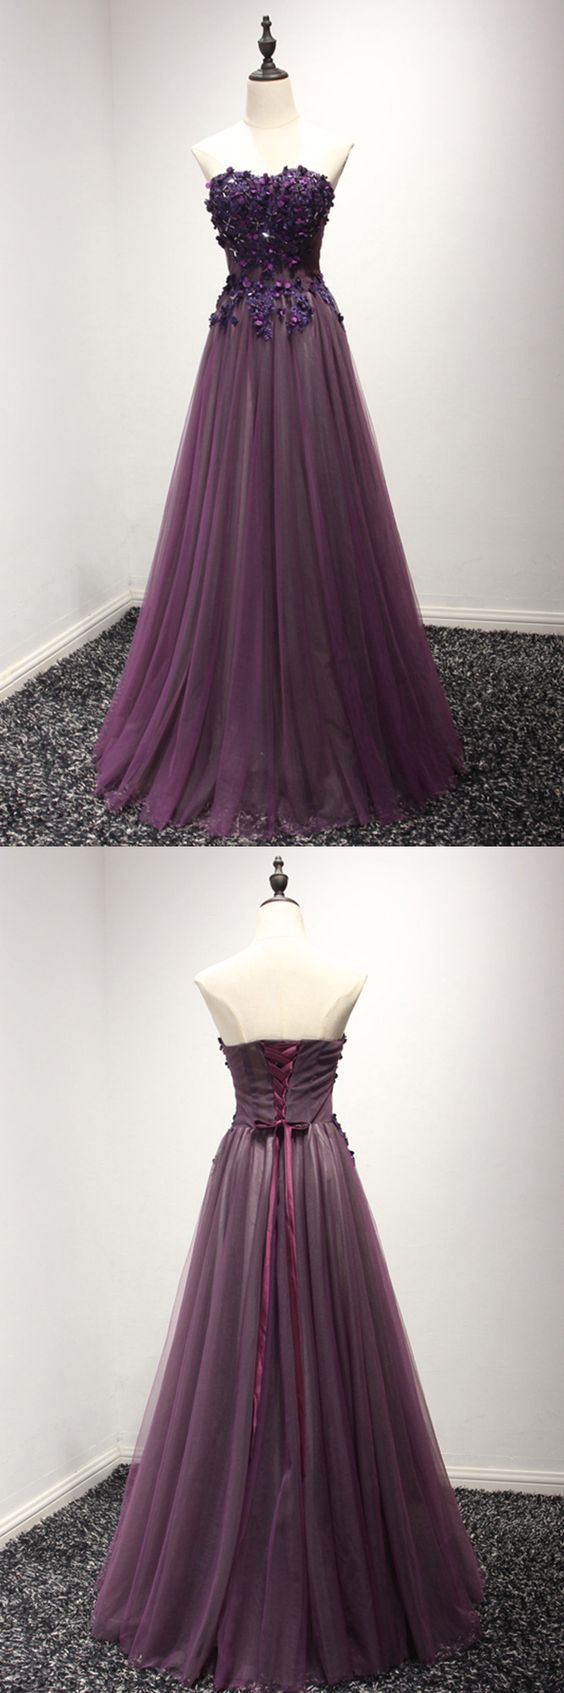 Purple Party Dress Long Floral Prom Formal Dress Strapless Evening Dress